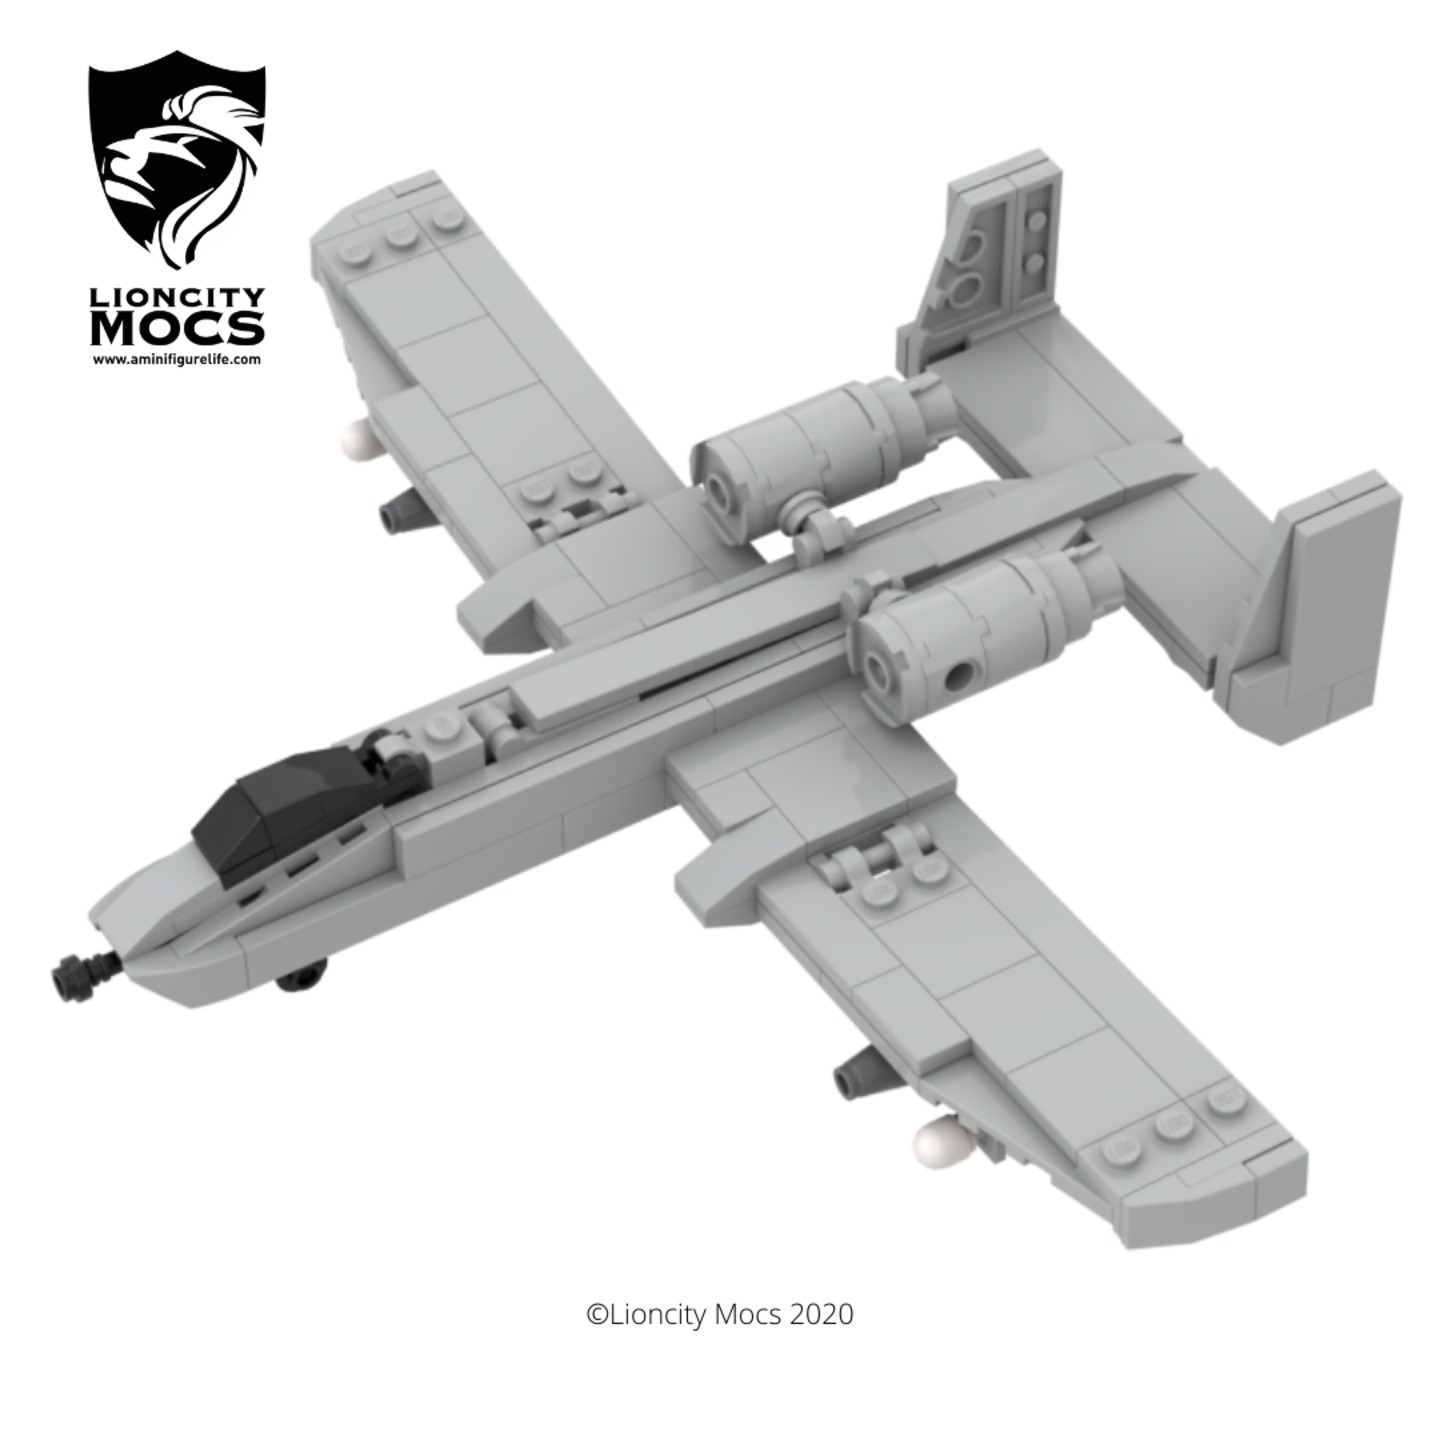  [PDF Instructions Only] A-10 Thunderbolt II Attack Aircraft Mini